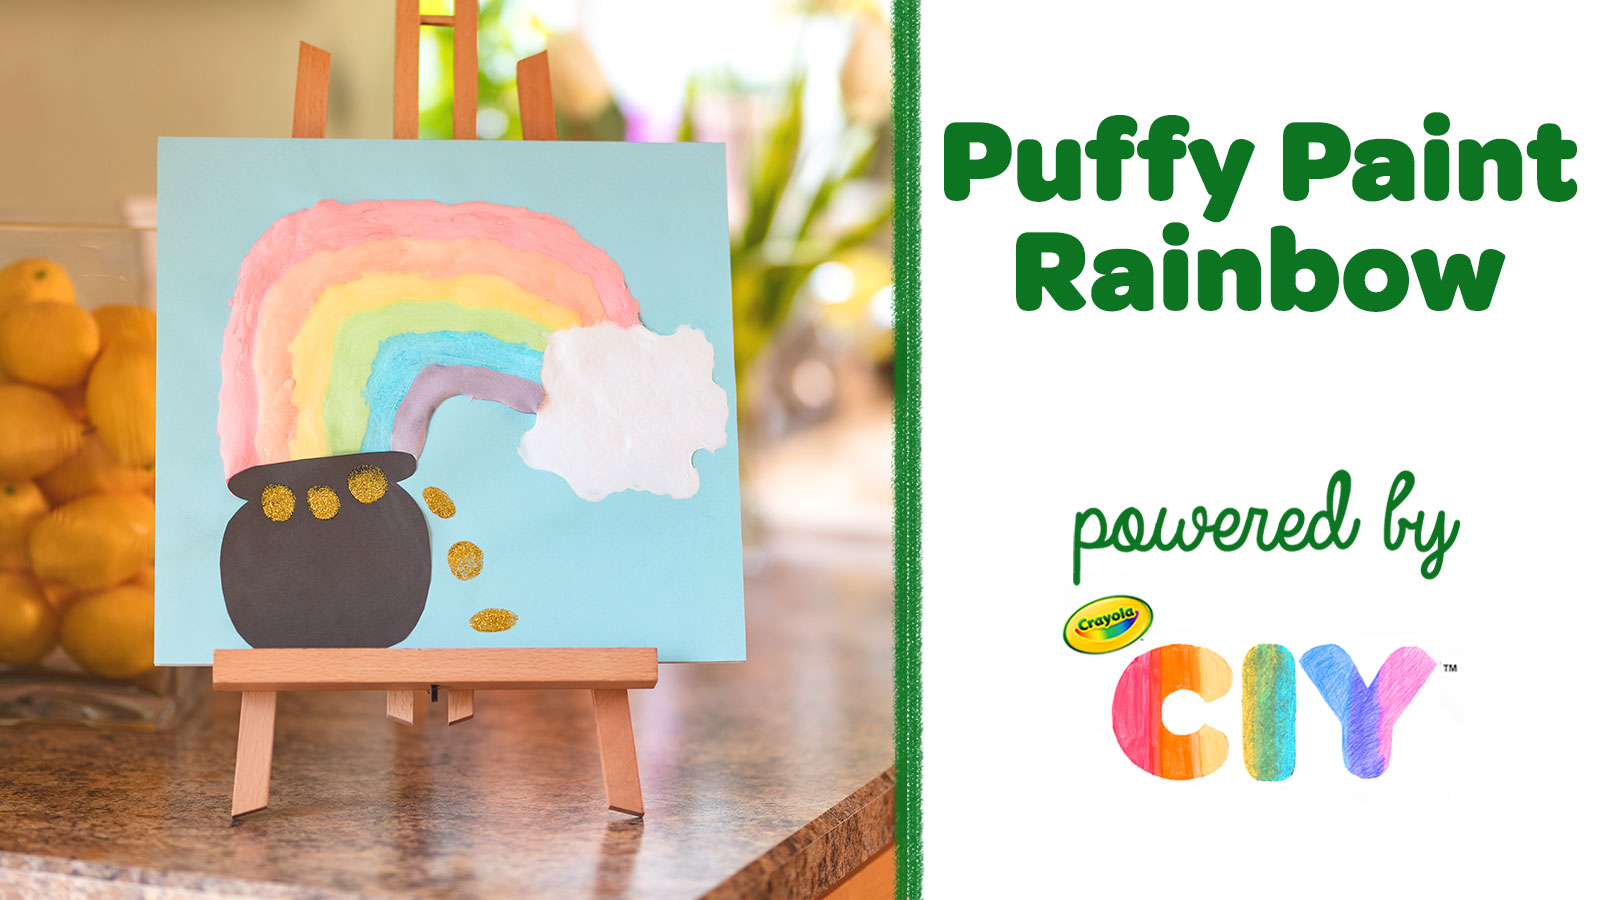 Puffy Paint Rainbow, Crafts, , Crayola CIY, DIY Crafts for  Kids and Adults